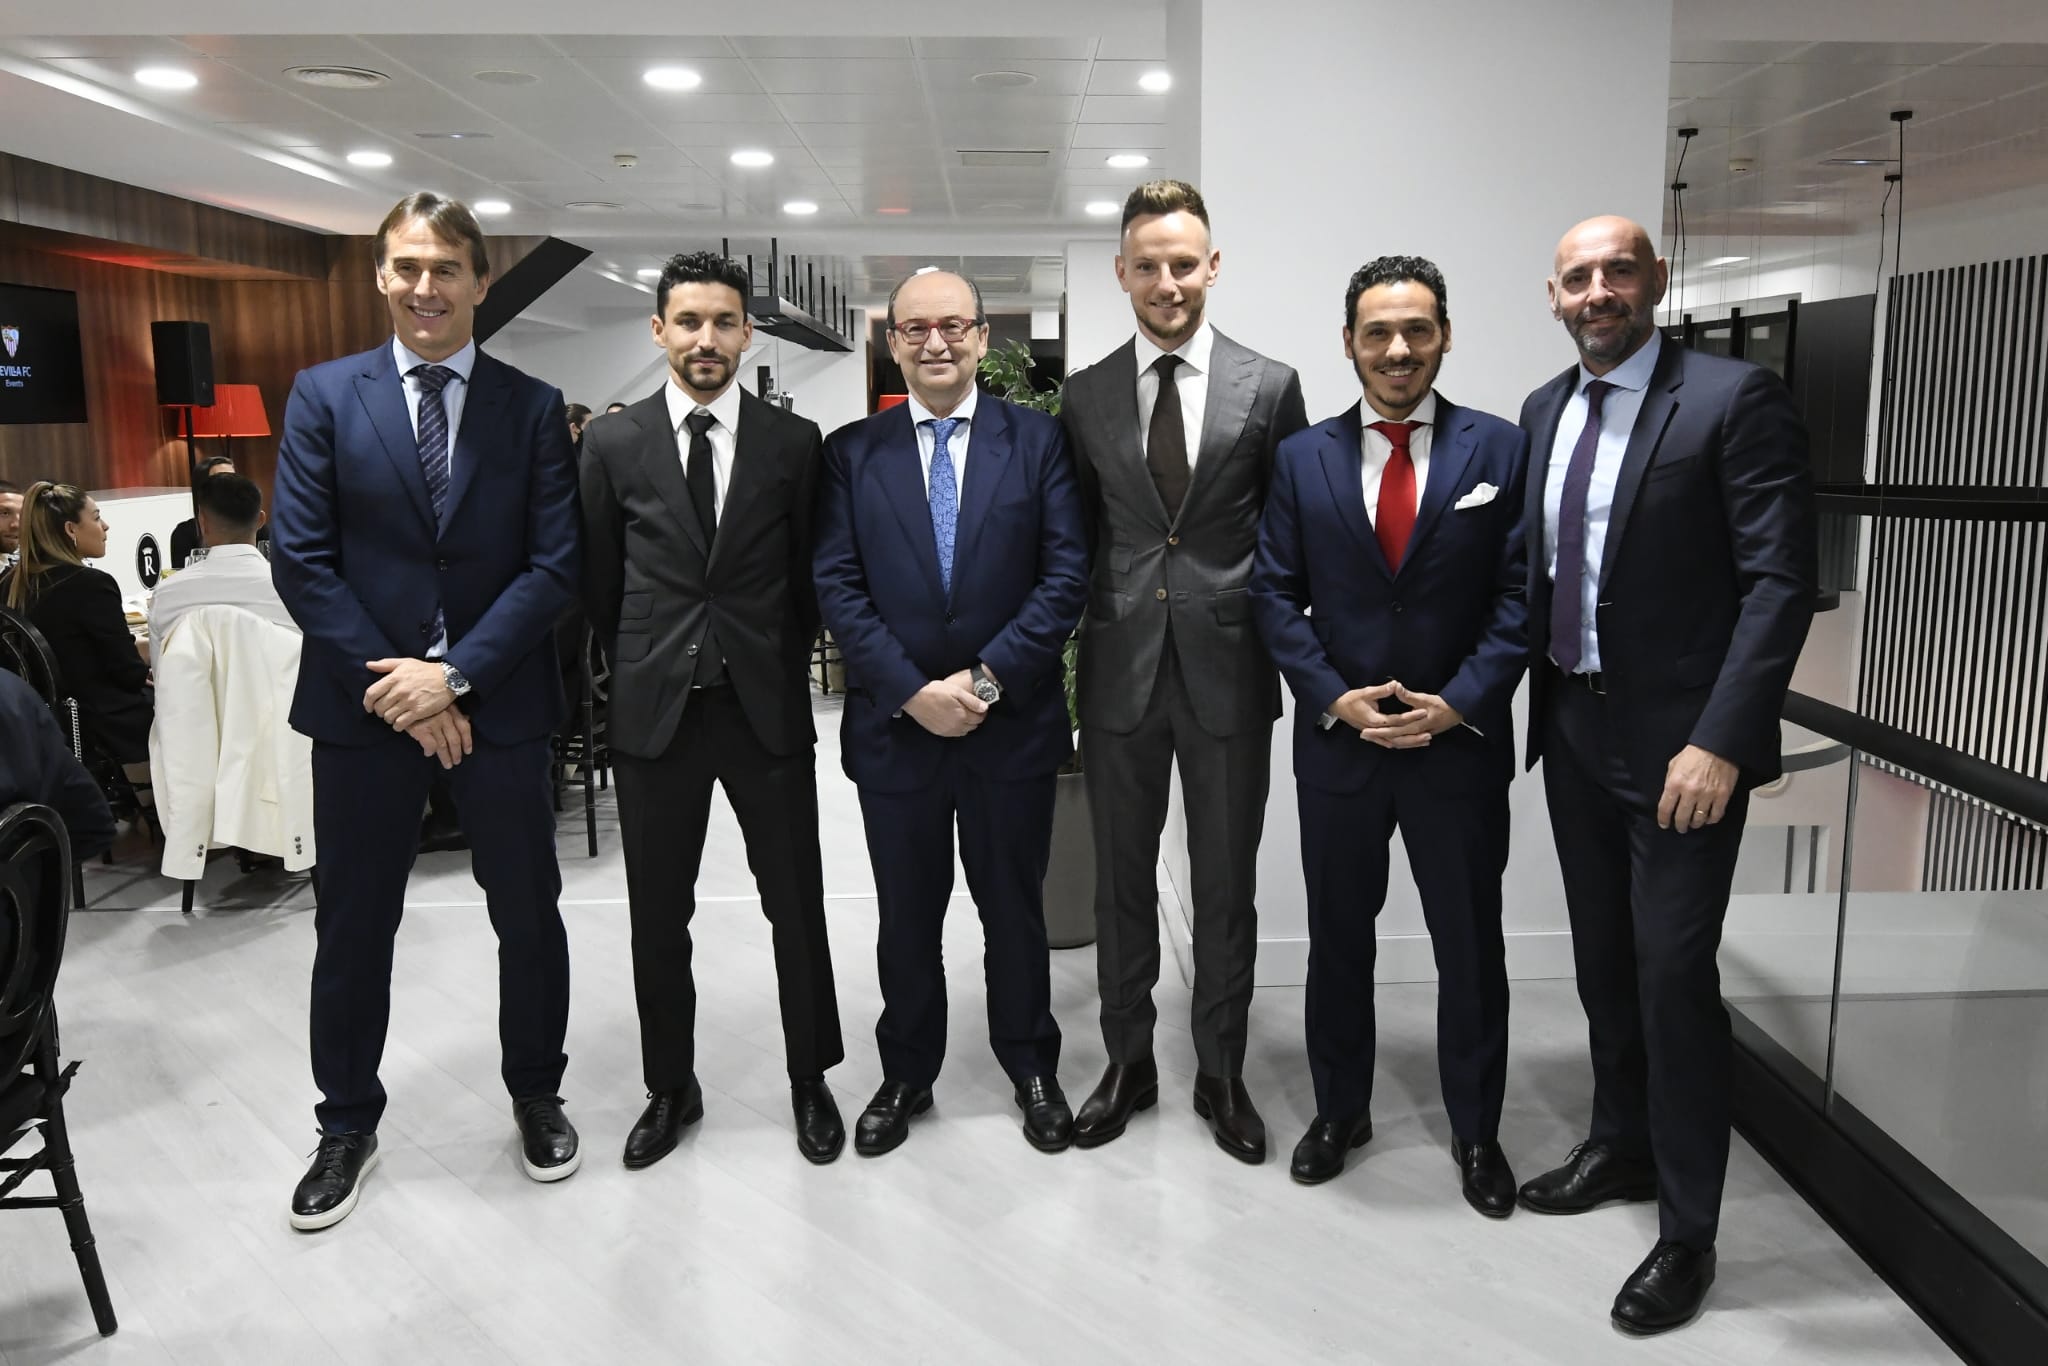 The president, vicepresident and Monchi pose together with the Sevilla FC captains